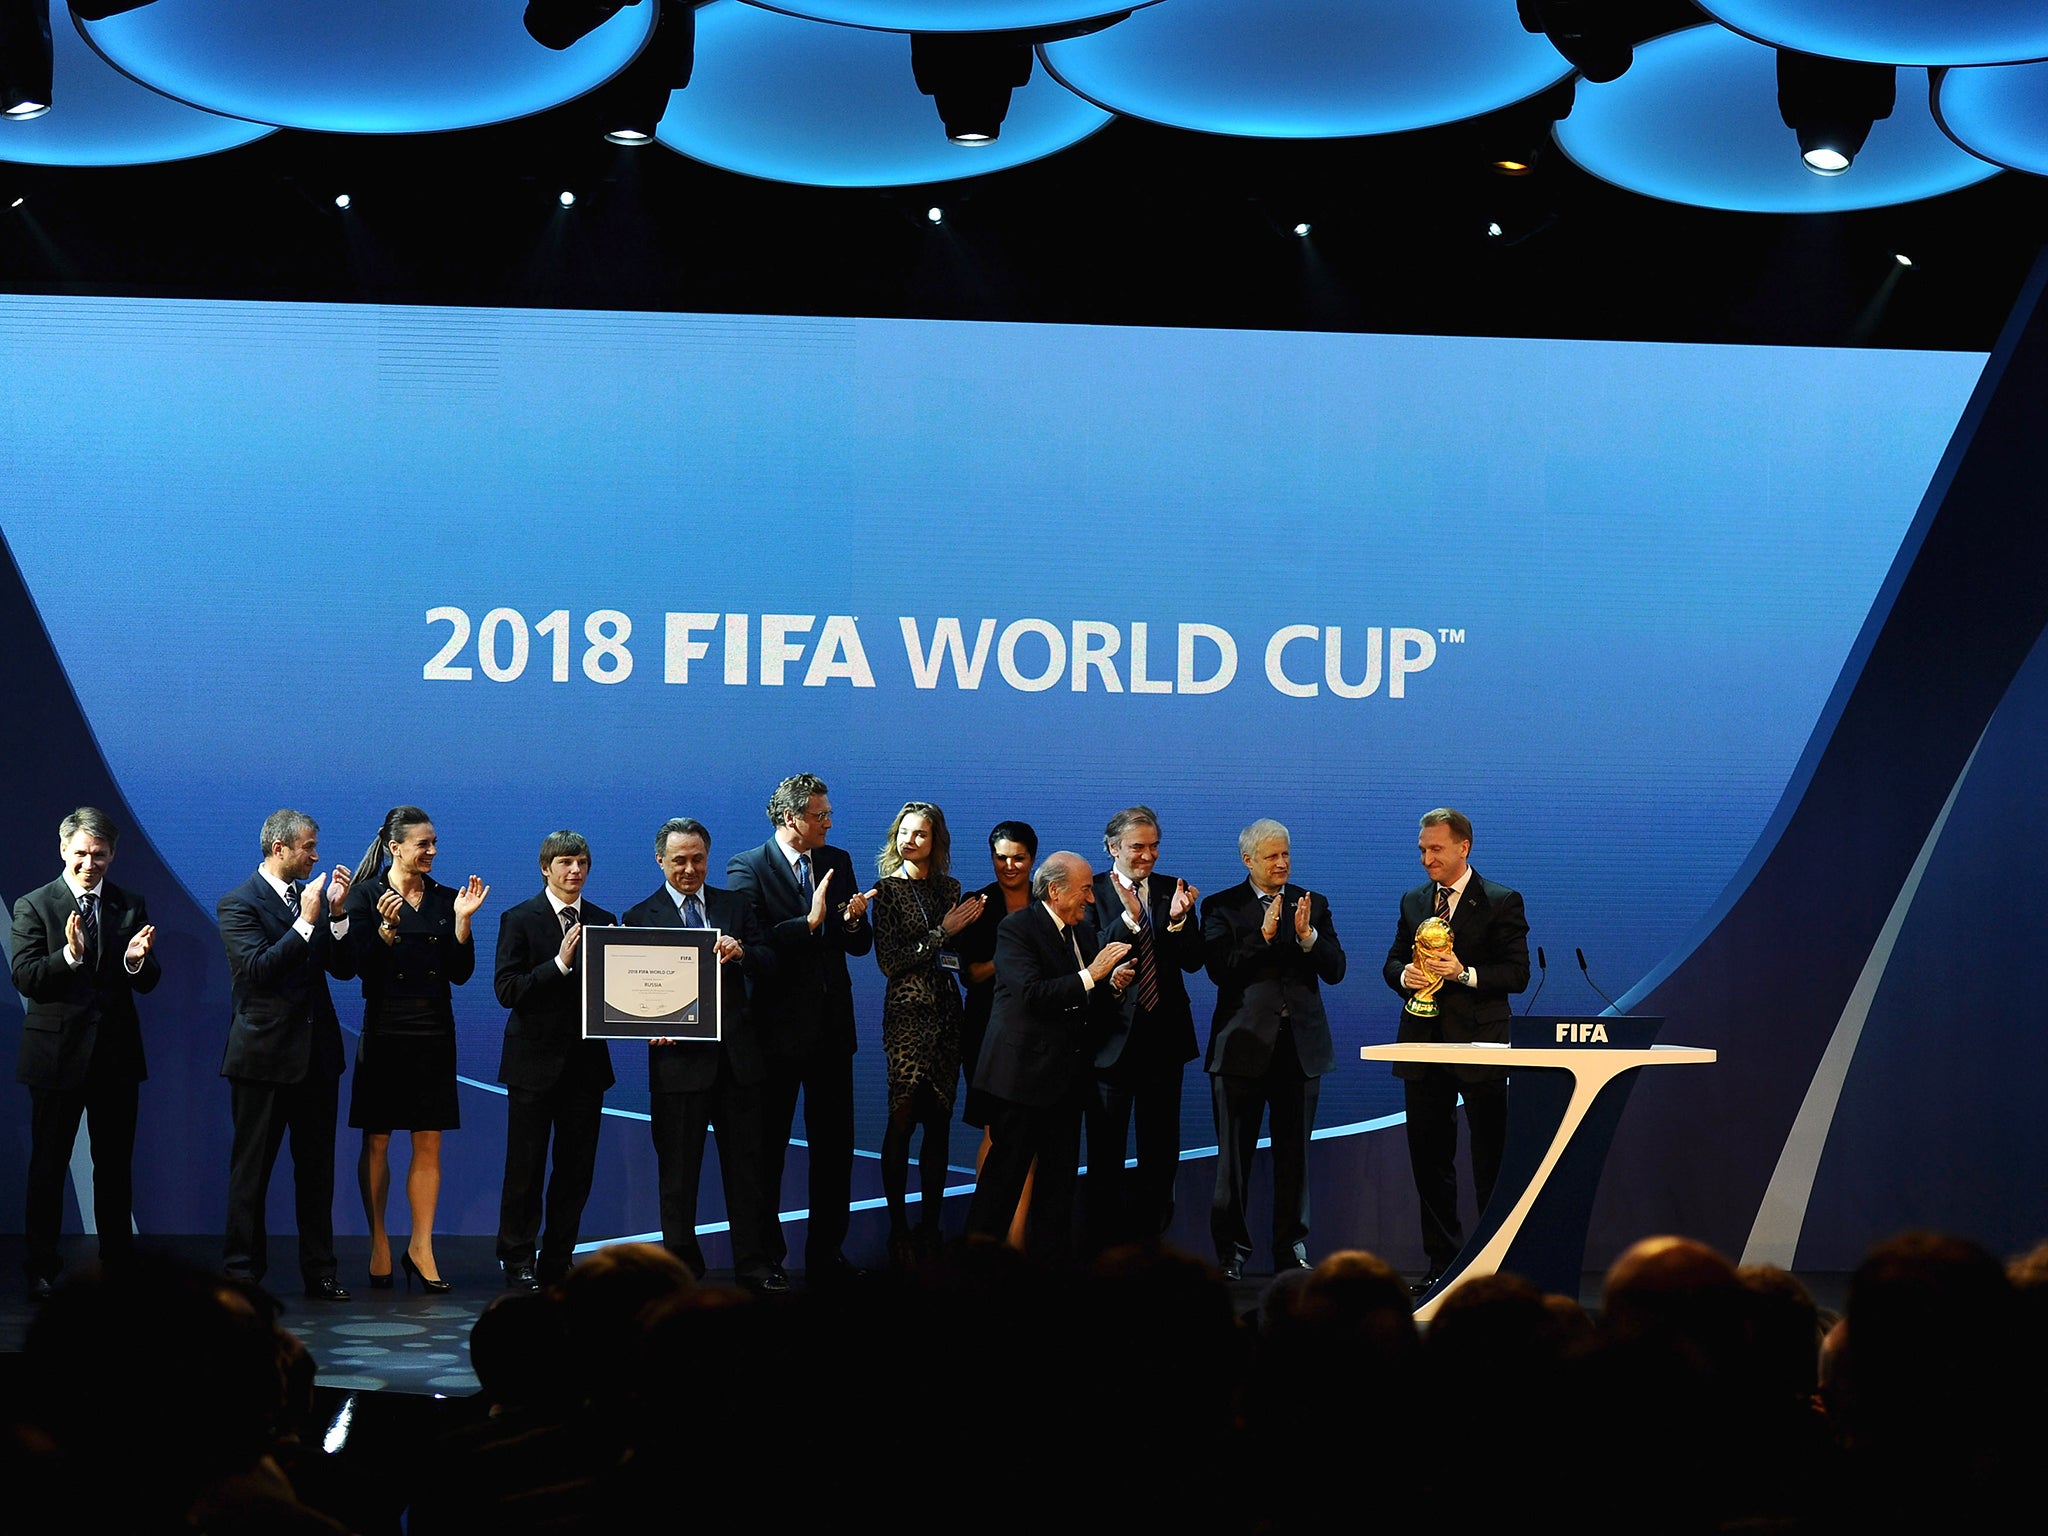 Russia is due to host the World Cup in 2018